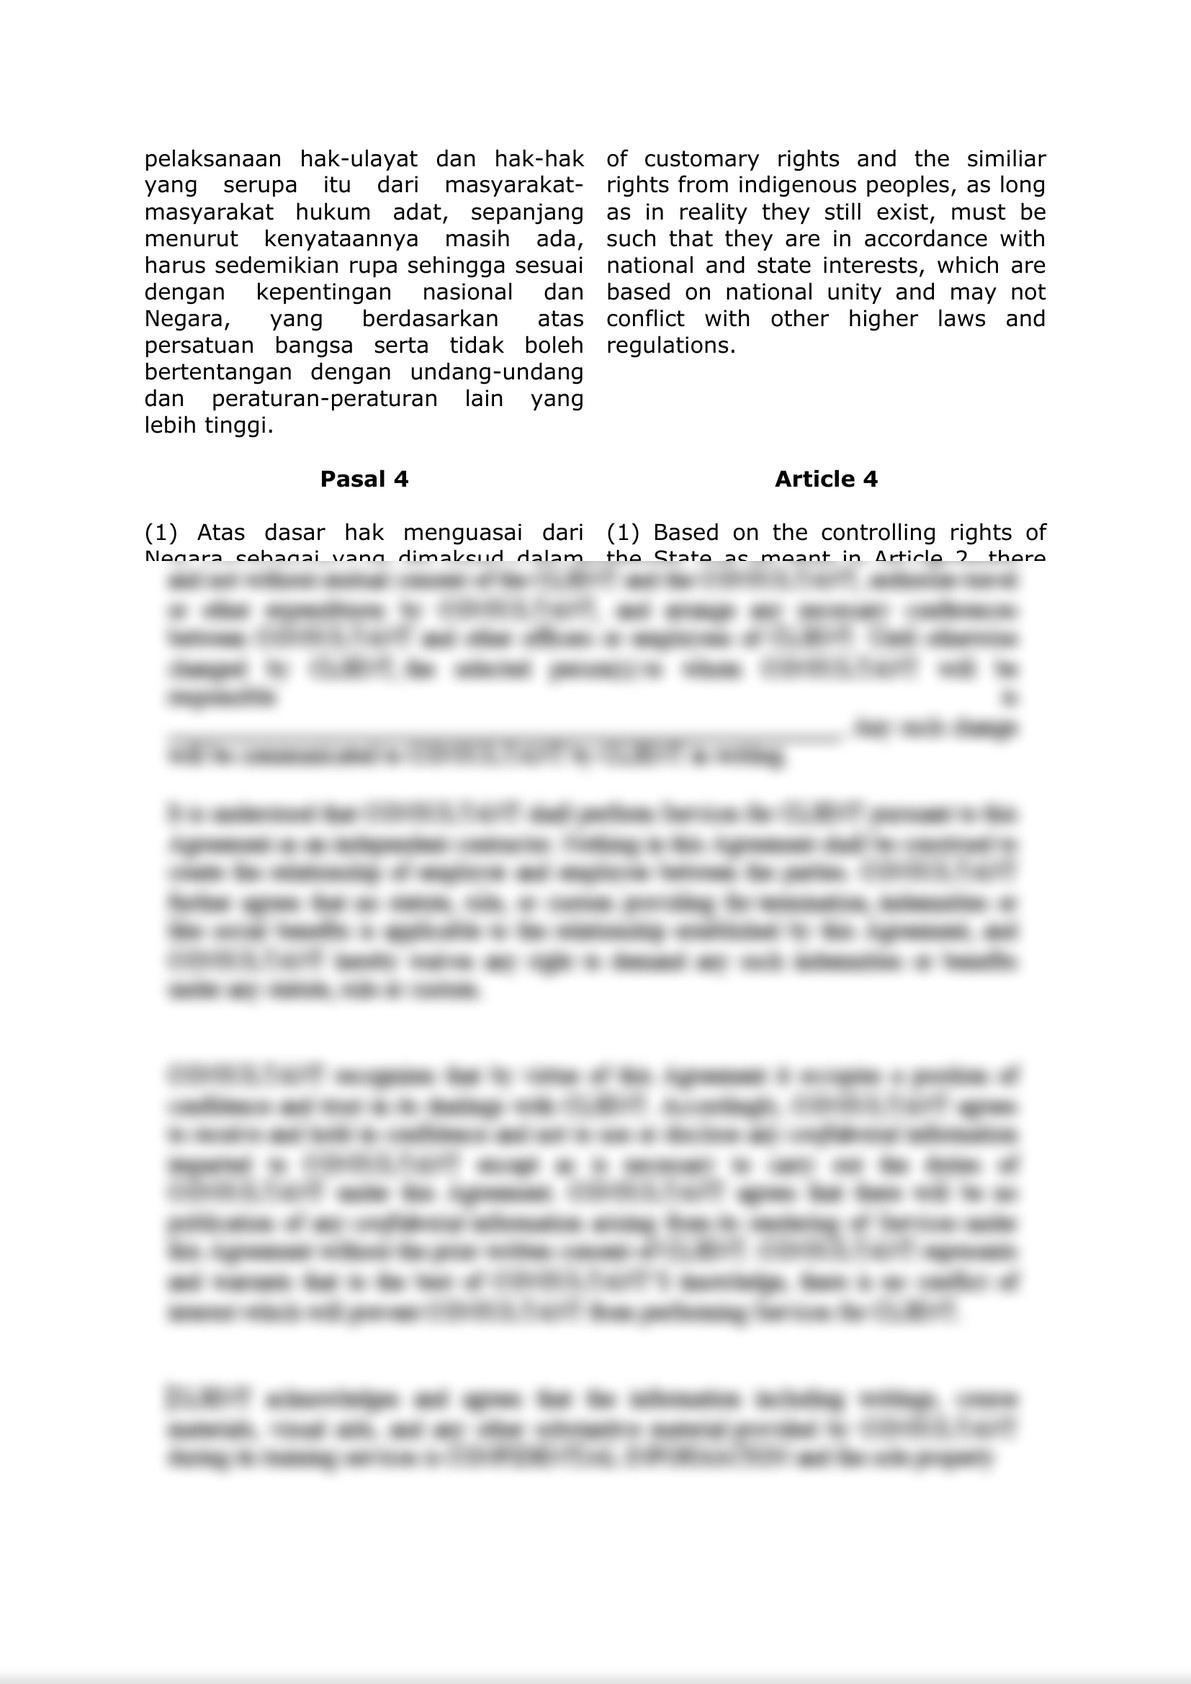 Law of the Republic of Indonesia Number: 5 of 1960 Concerning Basic Regulations on Agrarian Principles-2